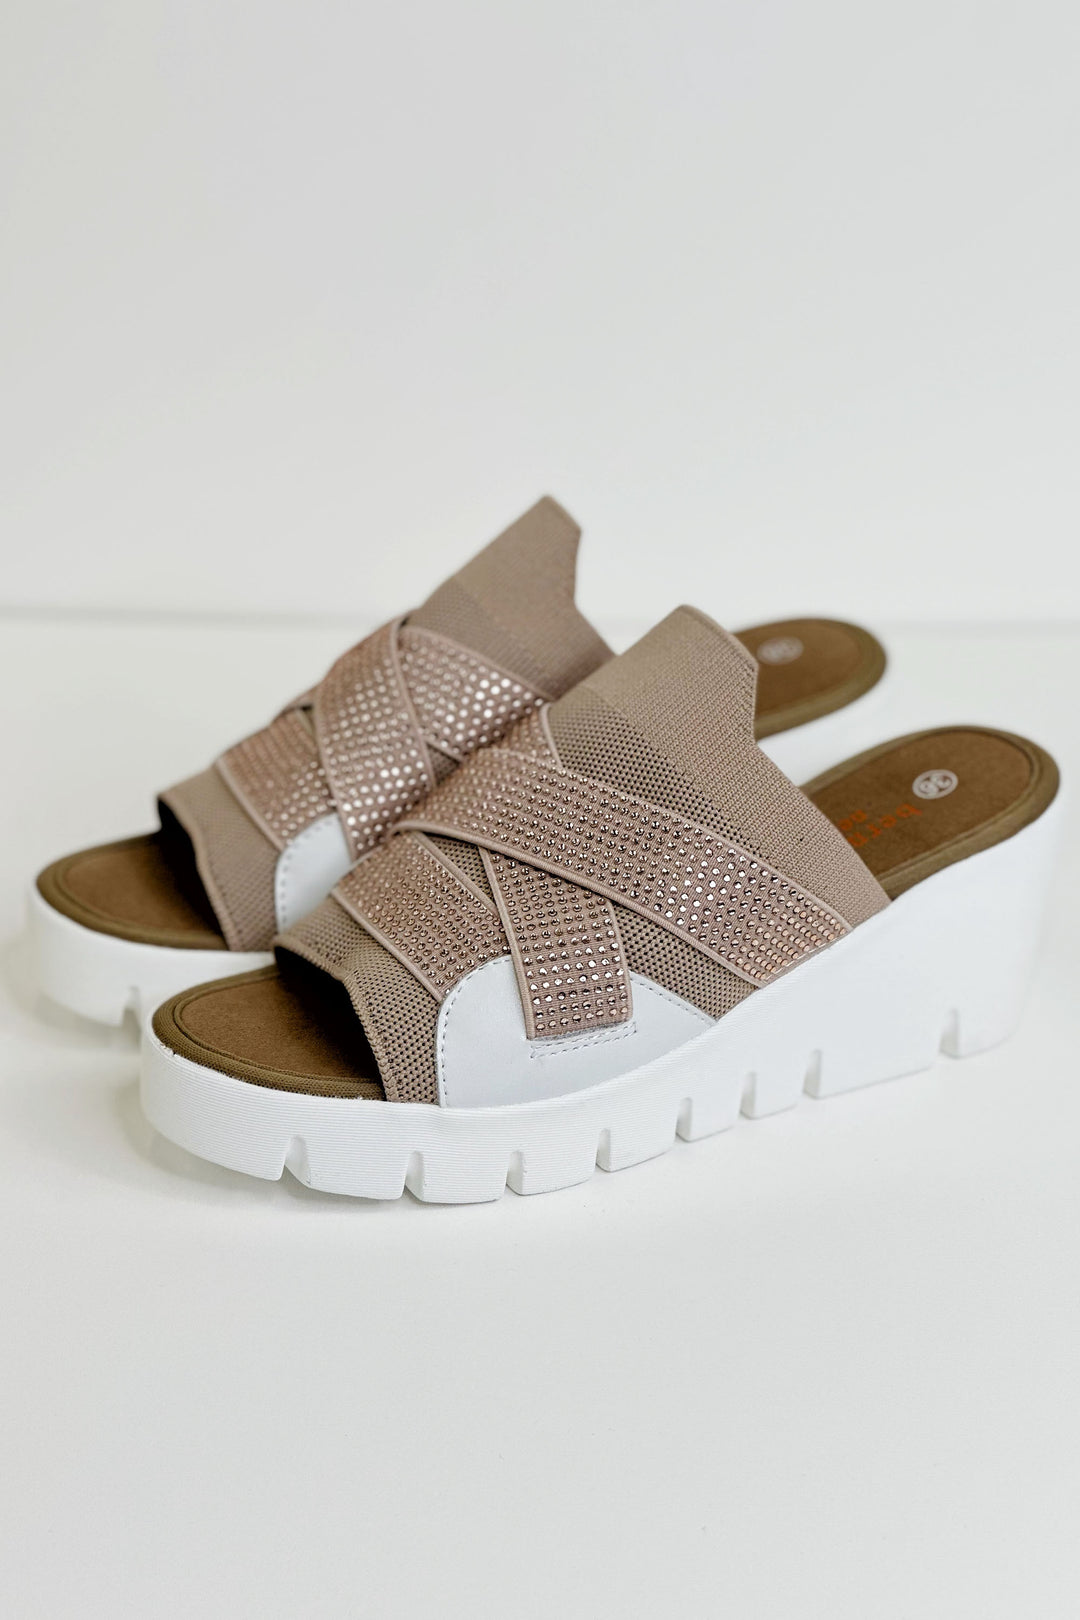 Bernie Mev Spring 2024 Featuring a molded sole and Bernie Mev’s signature memory foam footbed, stretchable knit upper and a rubber based sole, these slides will be comfortable all day long this summer!